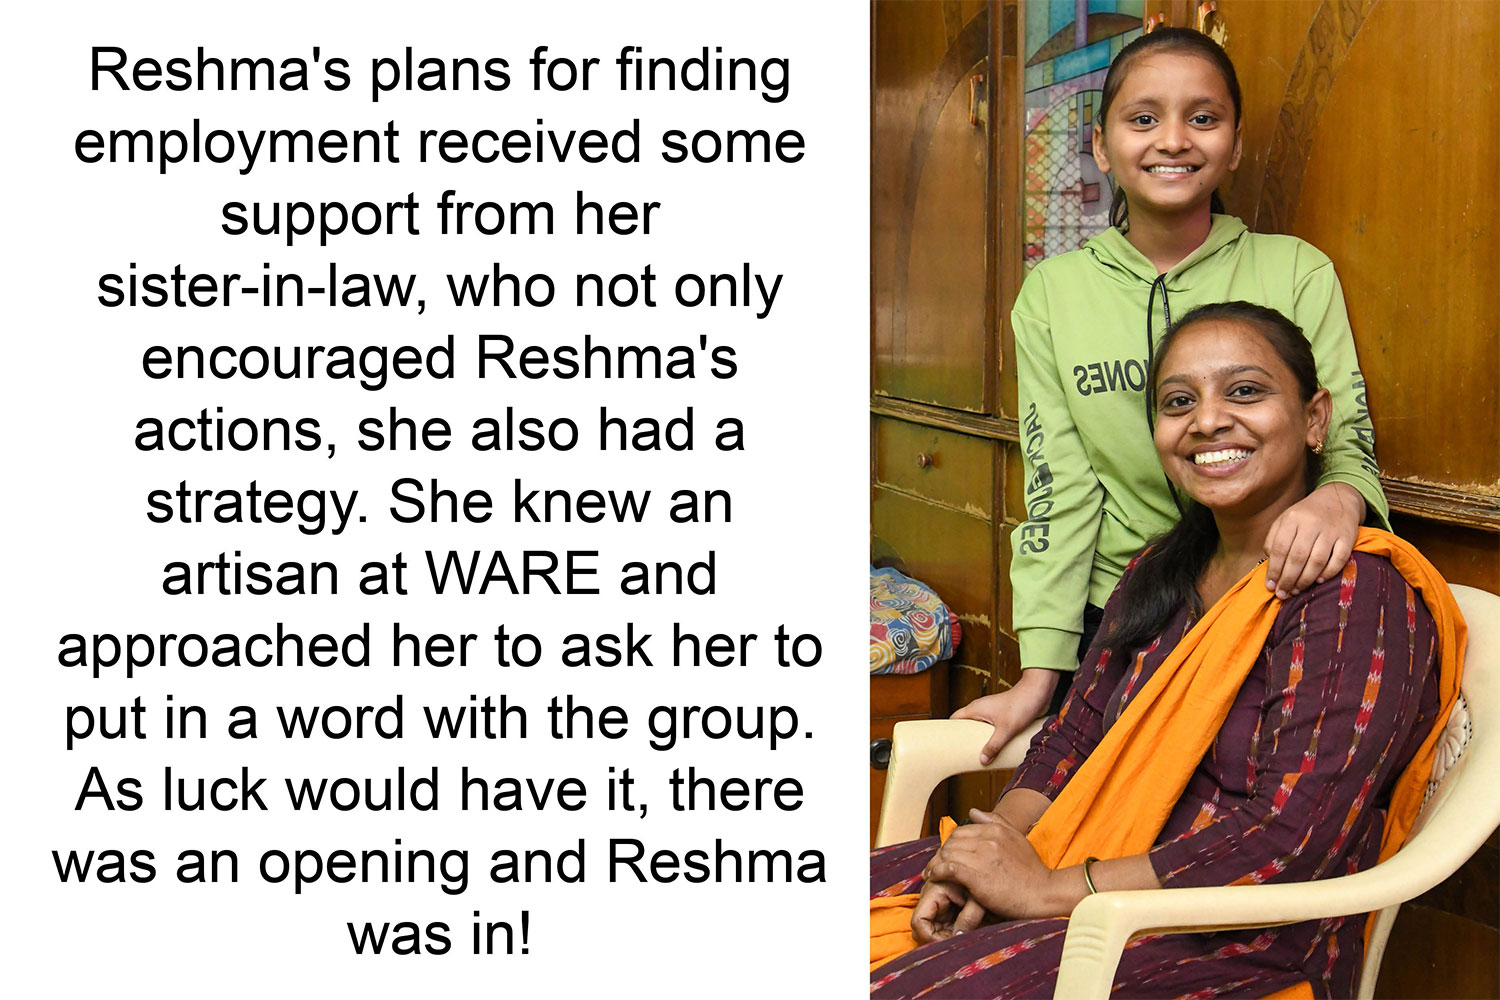 Reshma's plans for finding employment received some support from her sister-in-law, who not only encouraged Reshma's actions, she also had a strategy. She knew an artisan at WARE and approached her to ask her to put in a word with the group. As luck would have
it, there was an opening and Reshma was in!